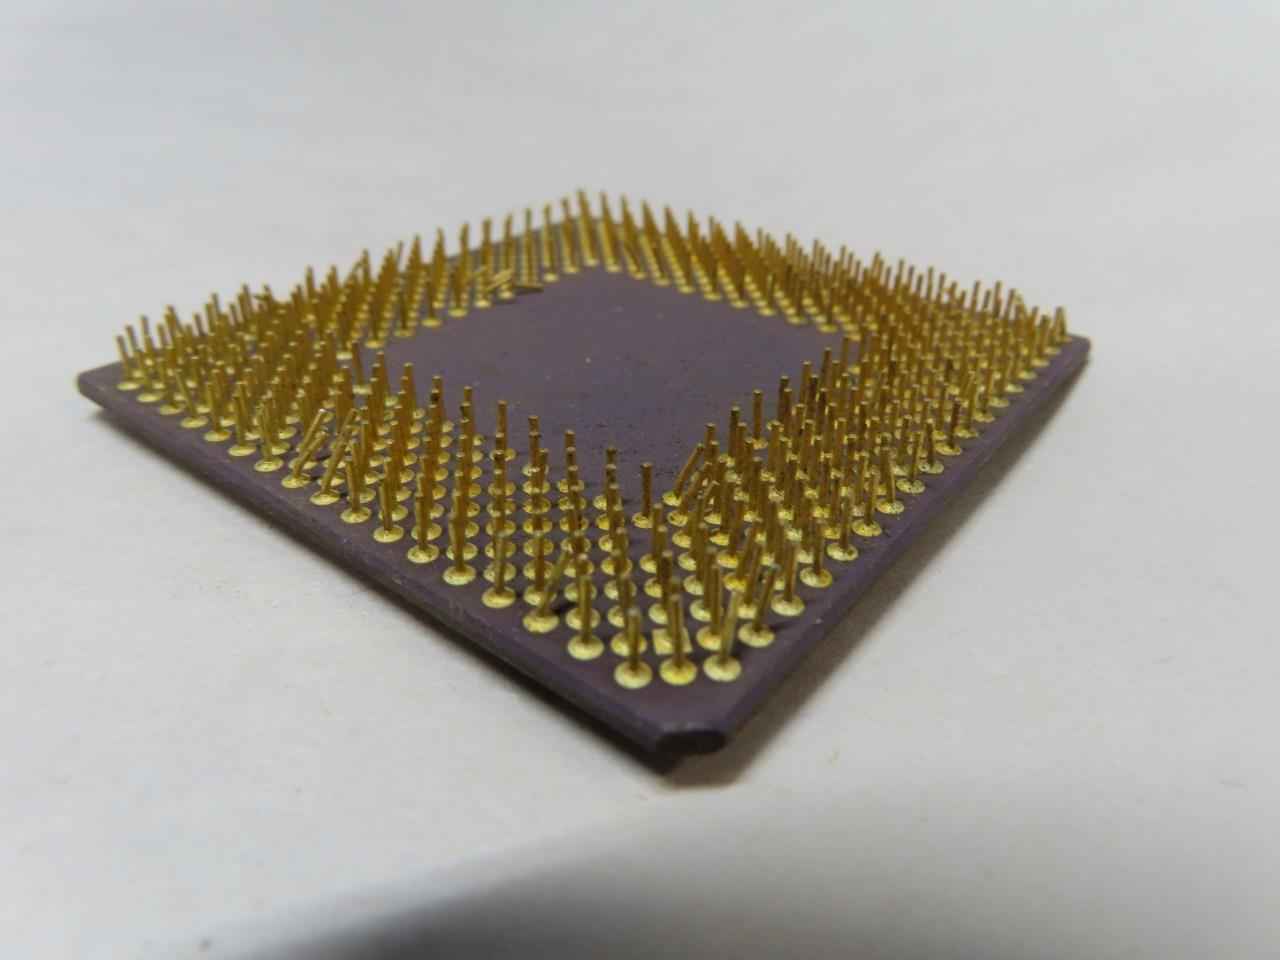 5 LBS 4 OZ AMD CERAMIC CPU WITH PIN'S FOR SCRAP GOLD RECOVERY (131 CPU)